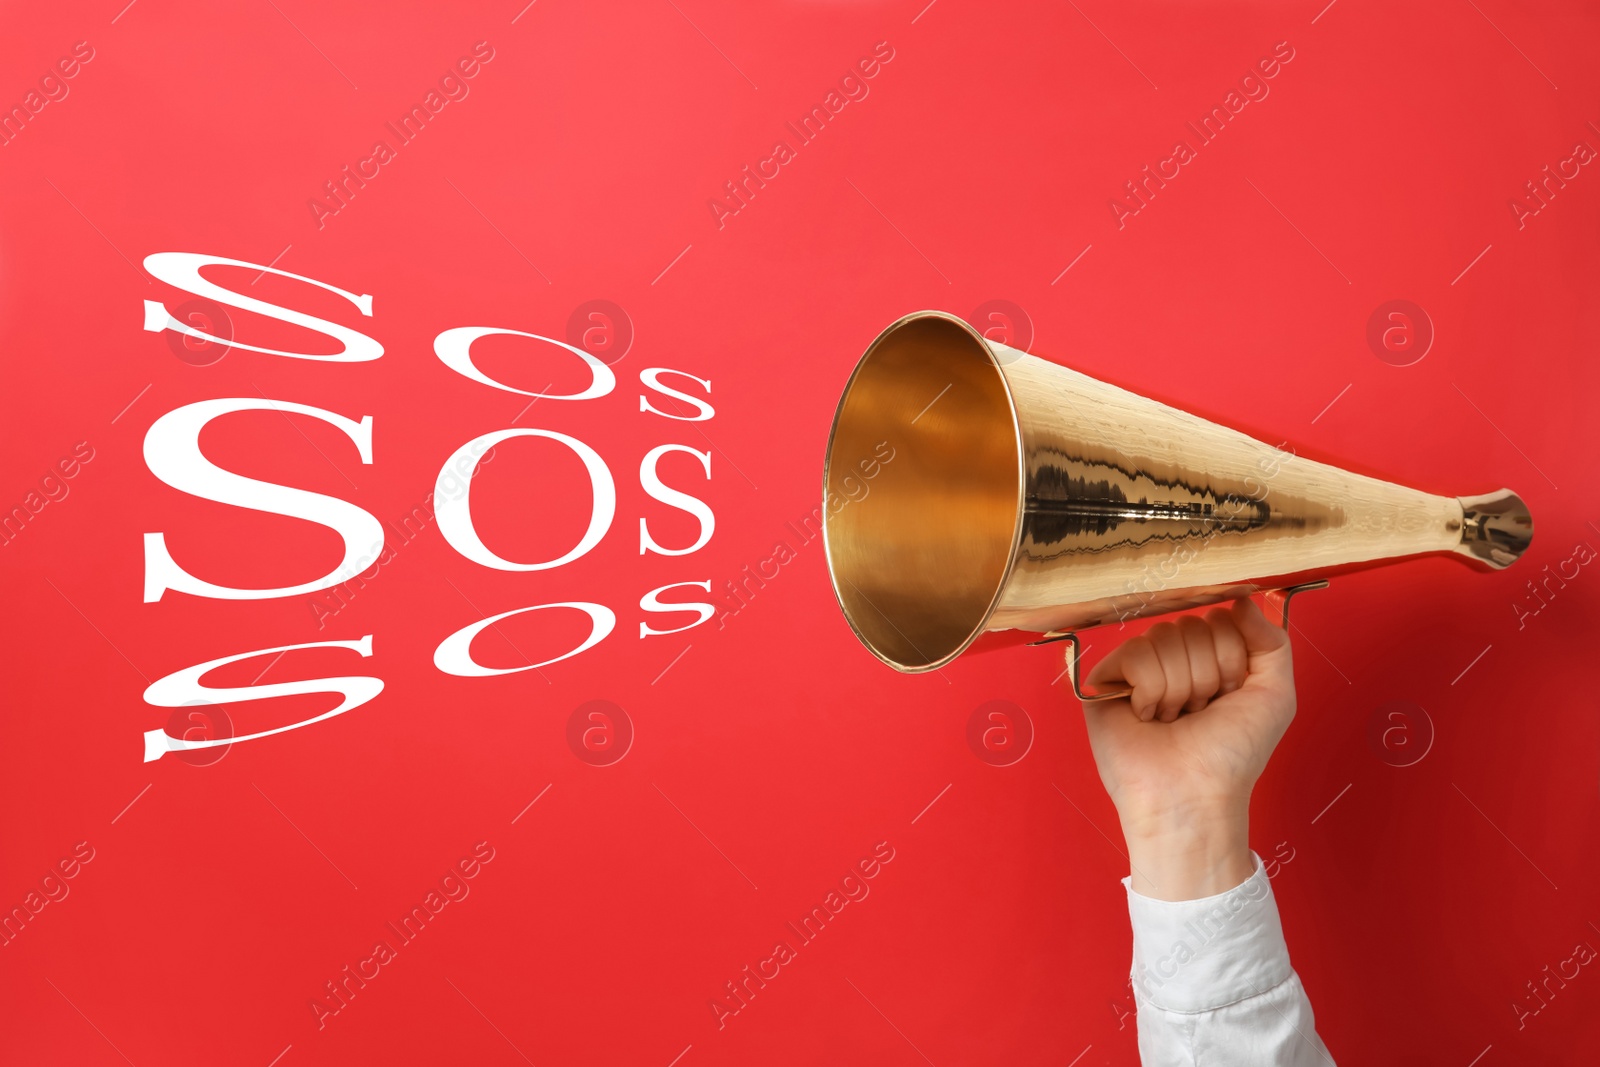 Image of Woman holding retro megaphone and words SOS on color background. Asking for help